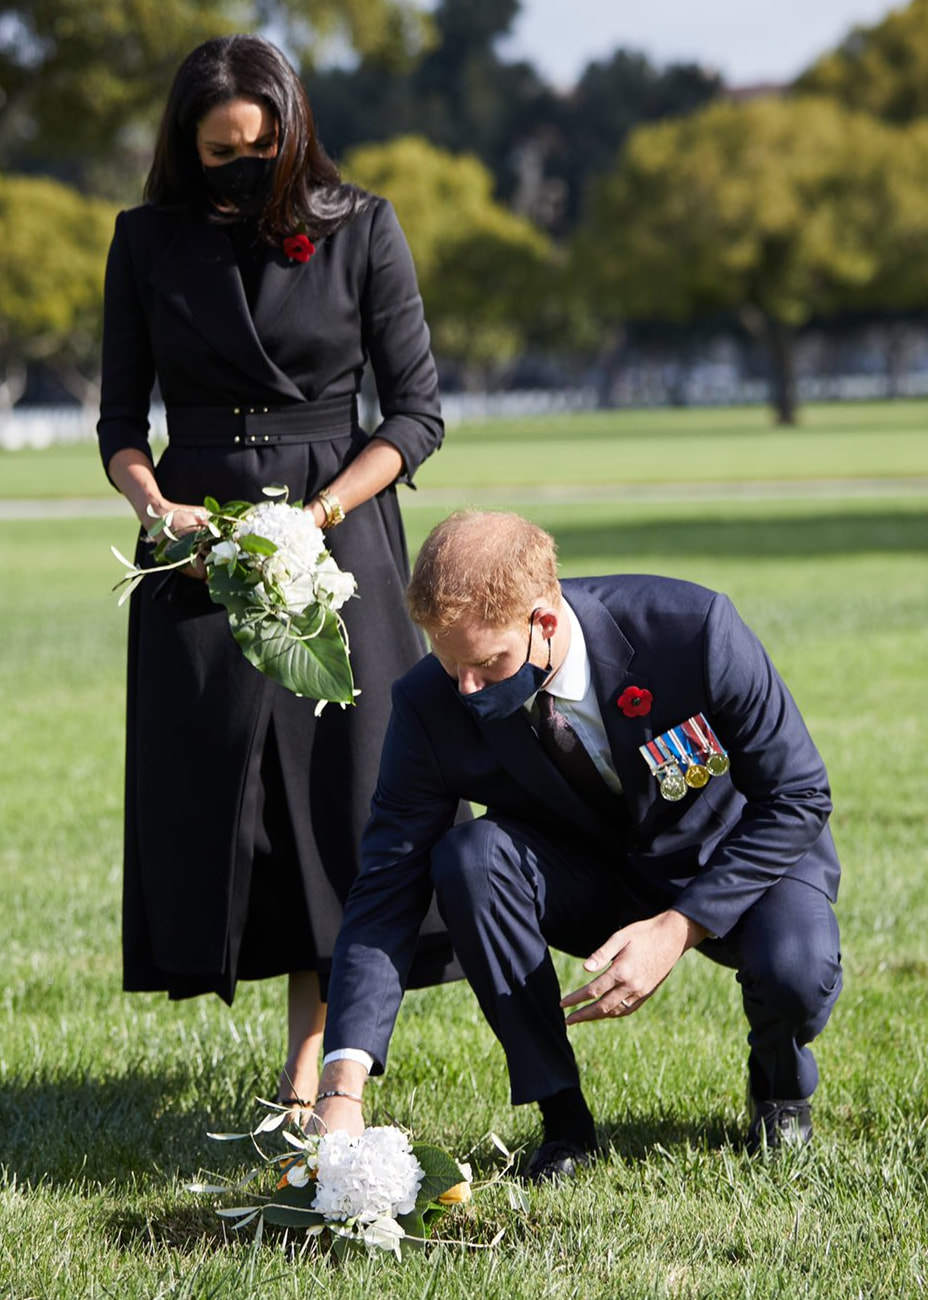 Prince Harry and Meghan Markle laid flowers picked from their garden at the gravesites of two Commonwealth soldiers, one who served in the Royal Australian Air Force and one from the Royal Canadian Artillery.